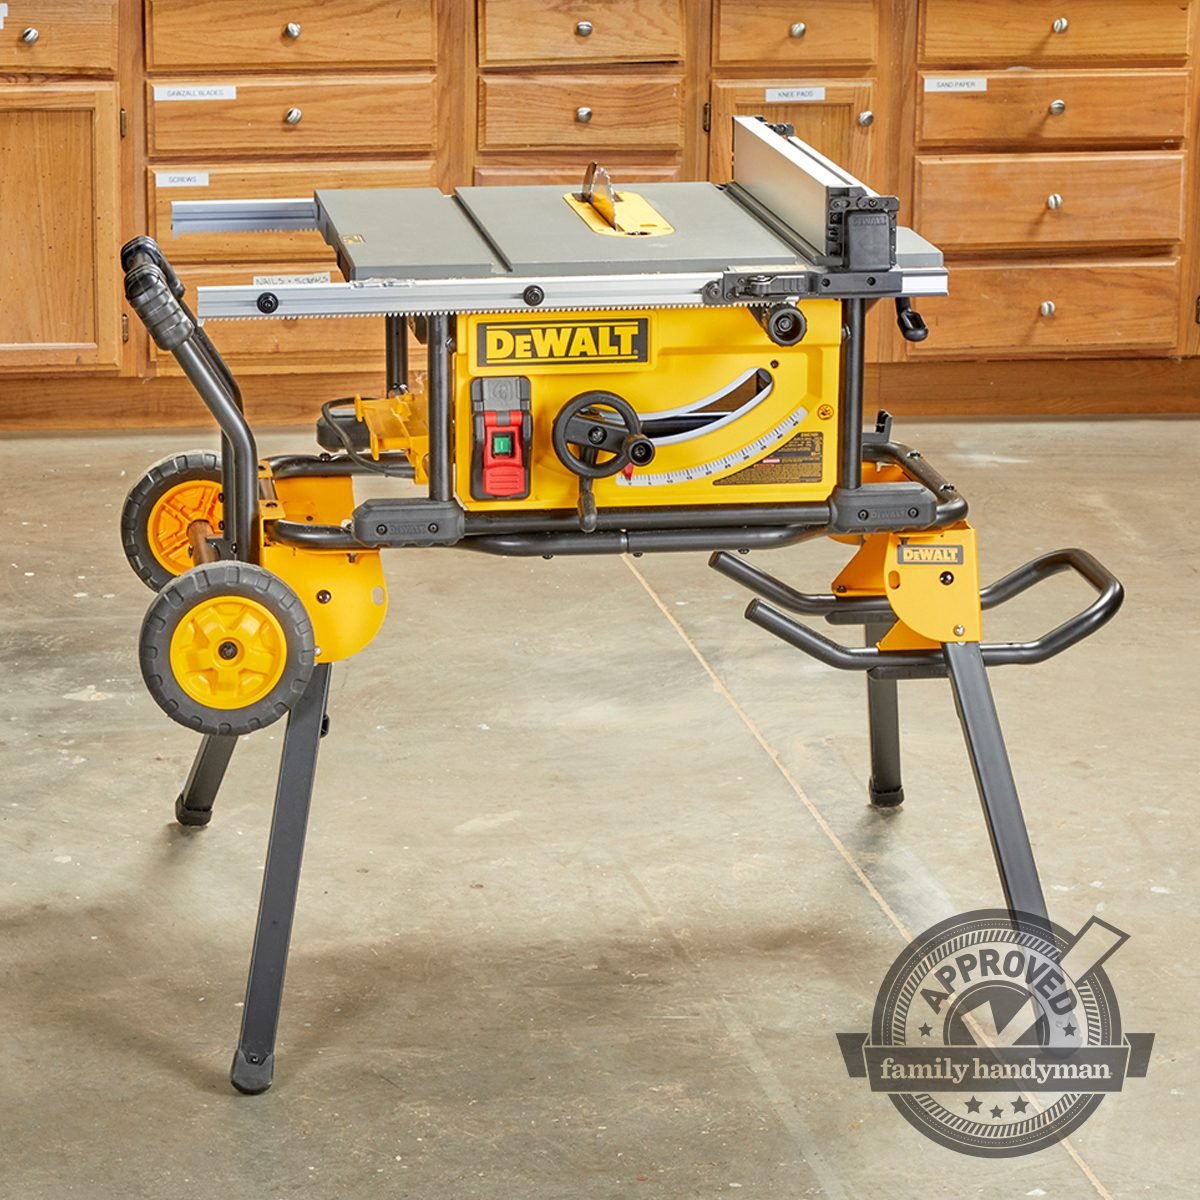 DeWalt Portable Table Saw Review: Handyman Approved